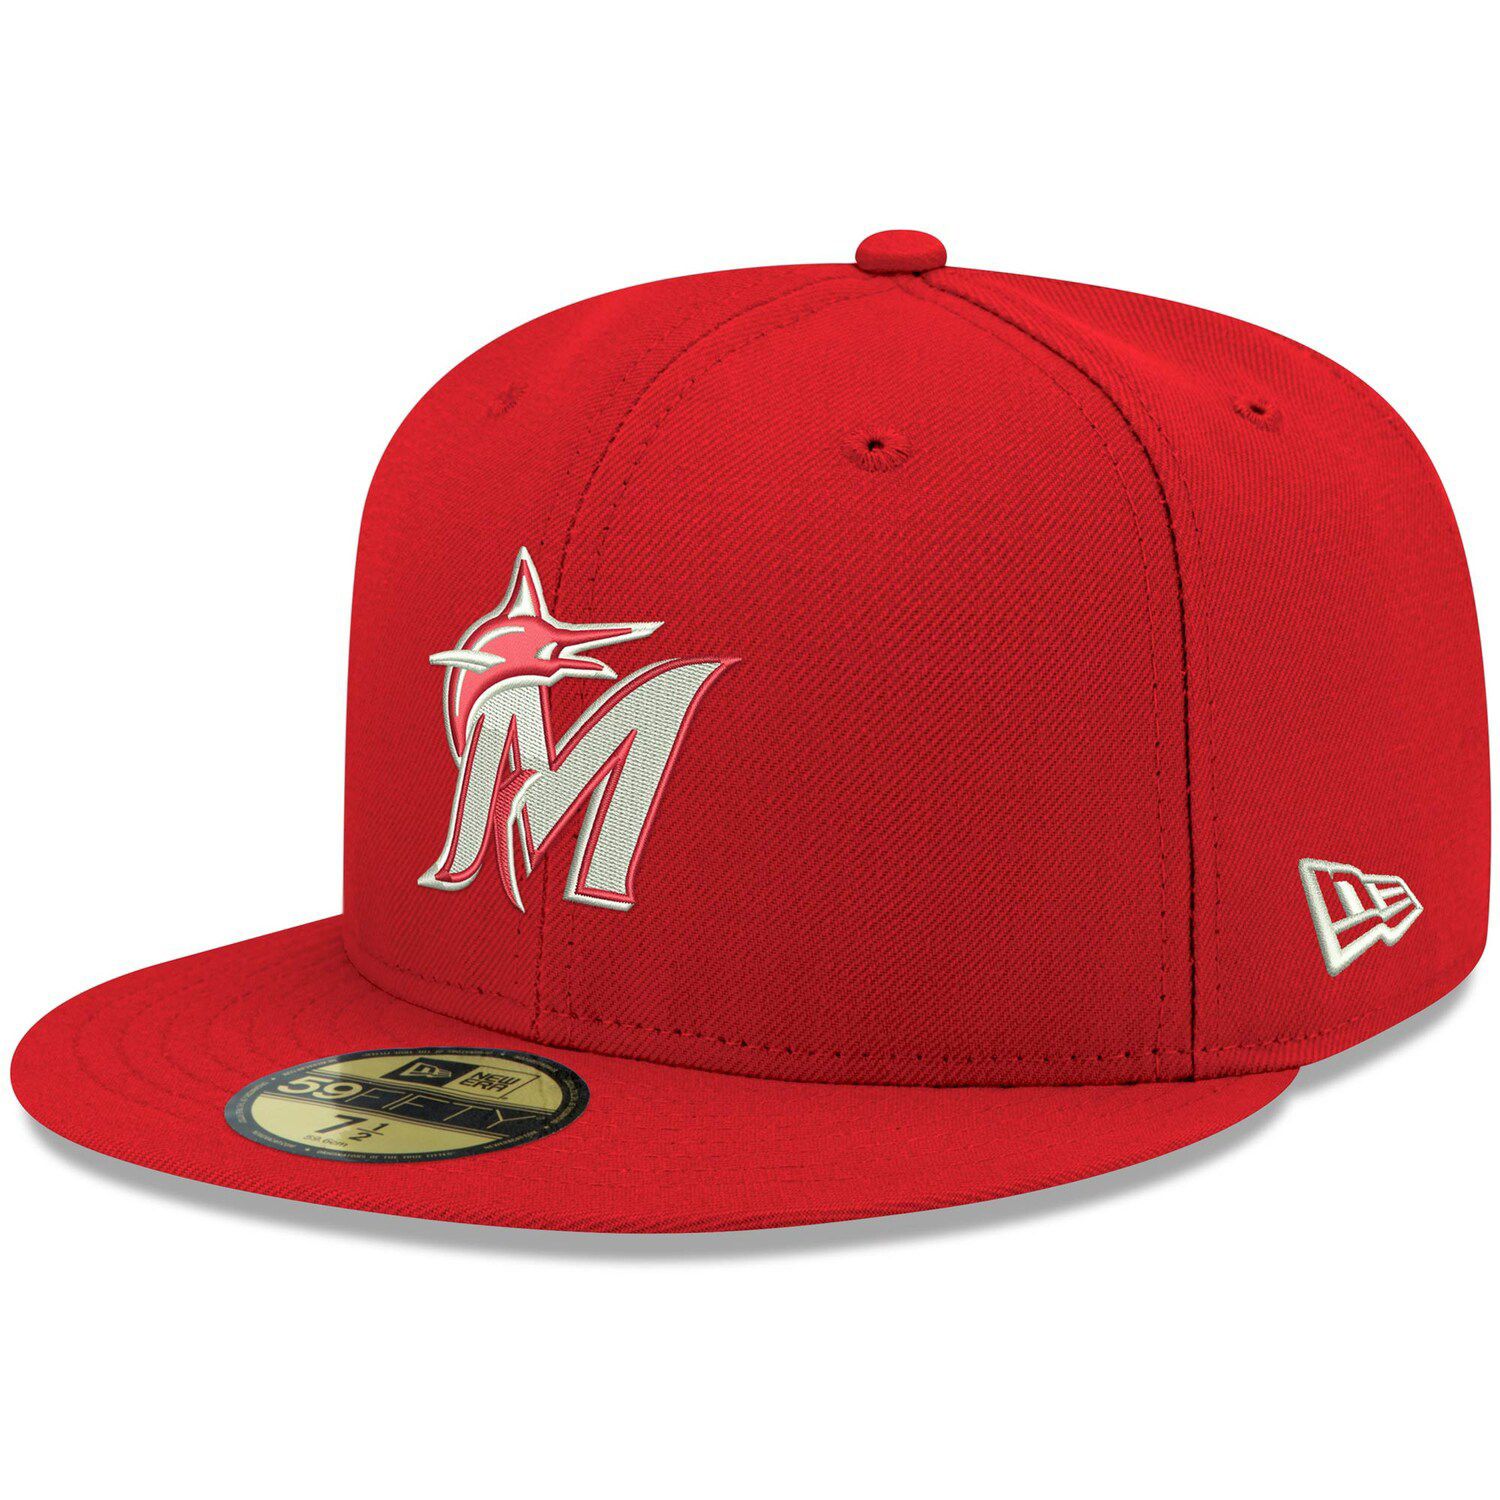 Men's New Era White/Black Miami Marlins 2017 MLB All-Star Game Primary Eye 59FIFTY Fitted Hat